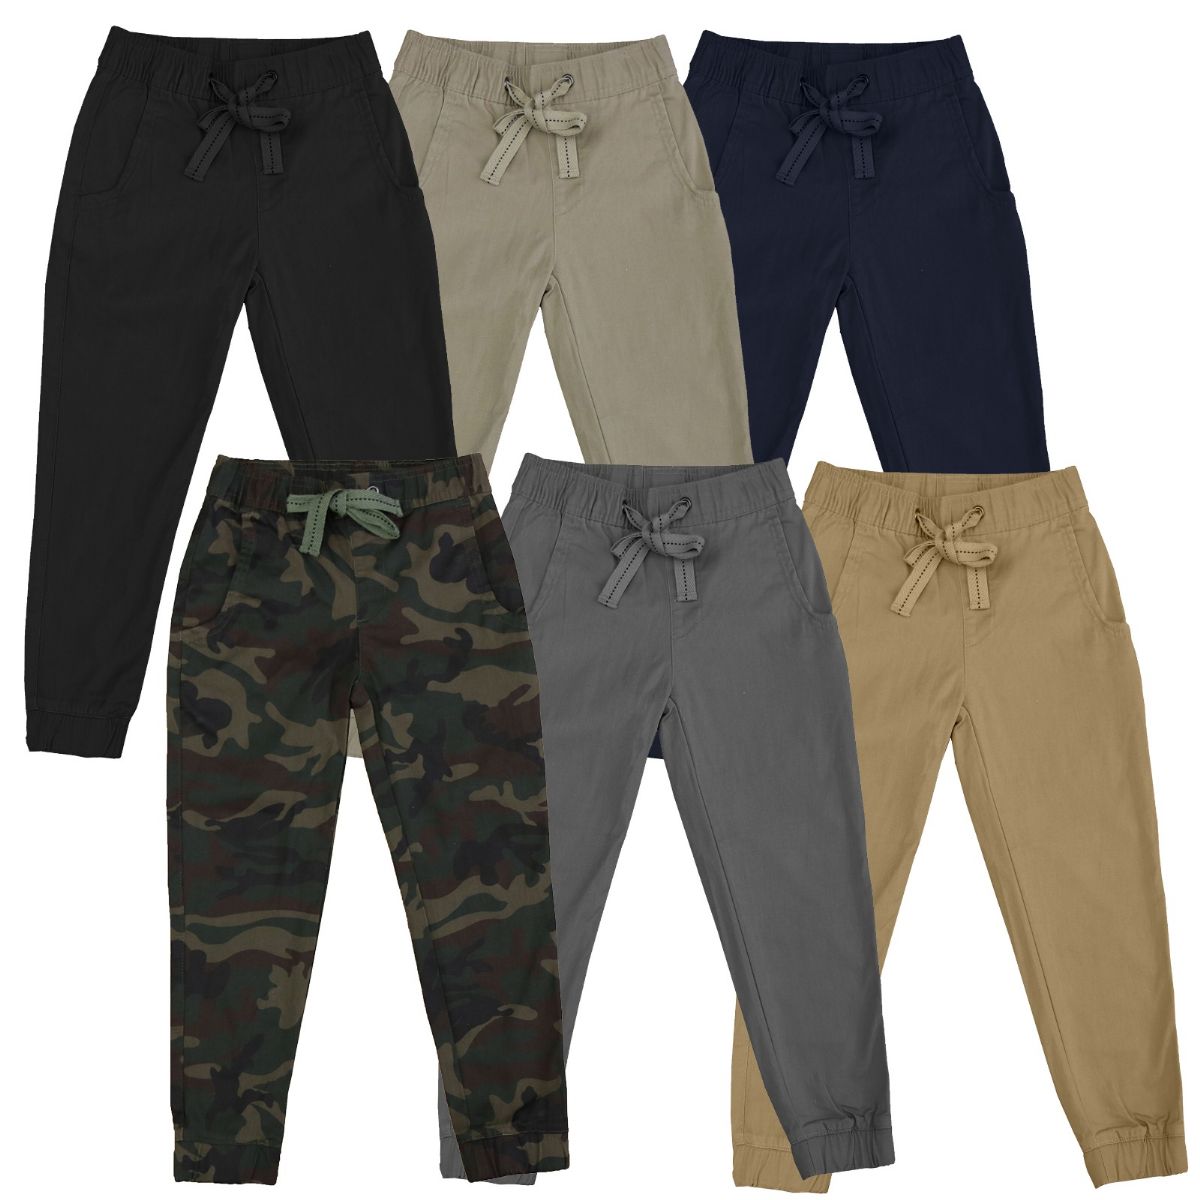 24 Pieces of Toddlers Boy Jogger Pants In Camouflage And Gray Color